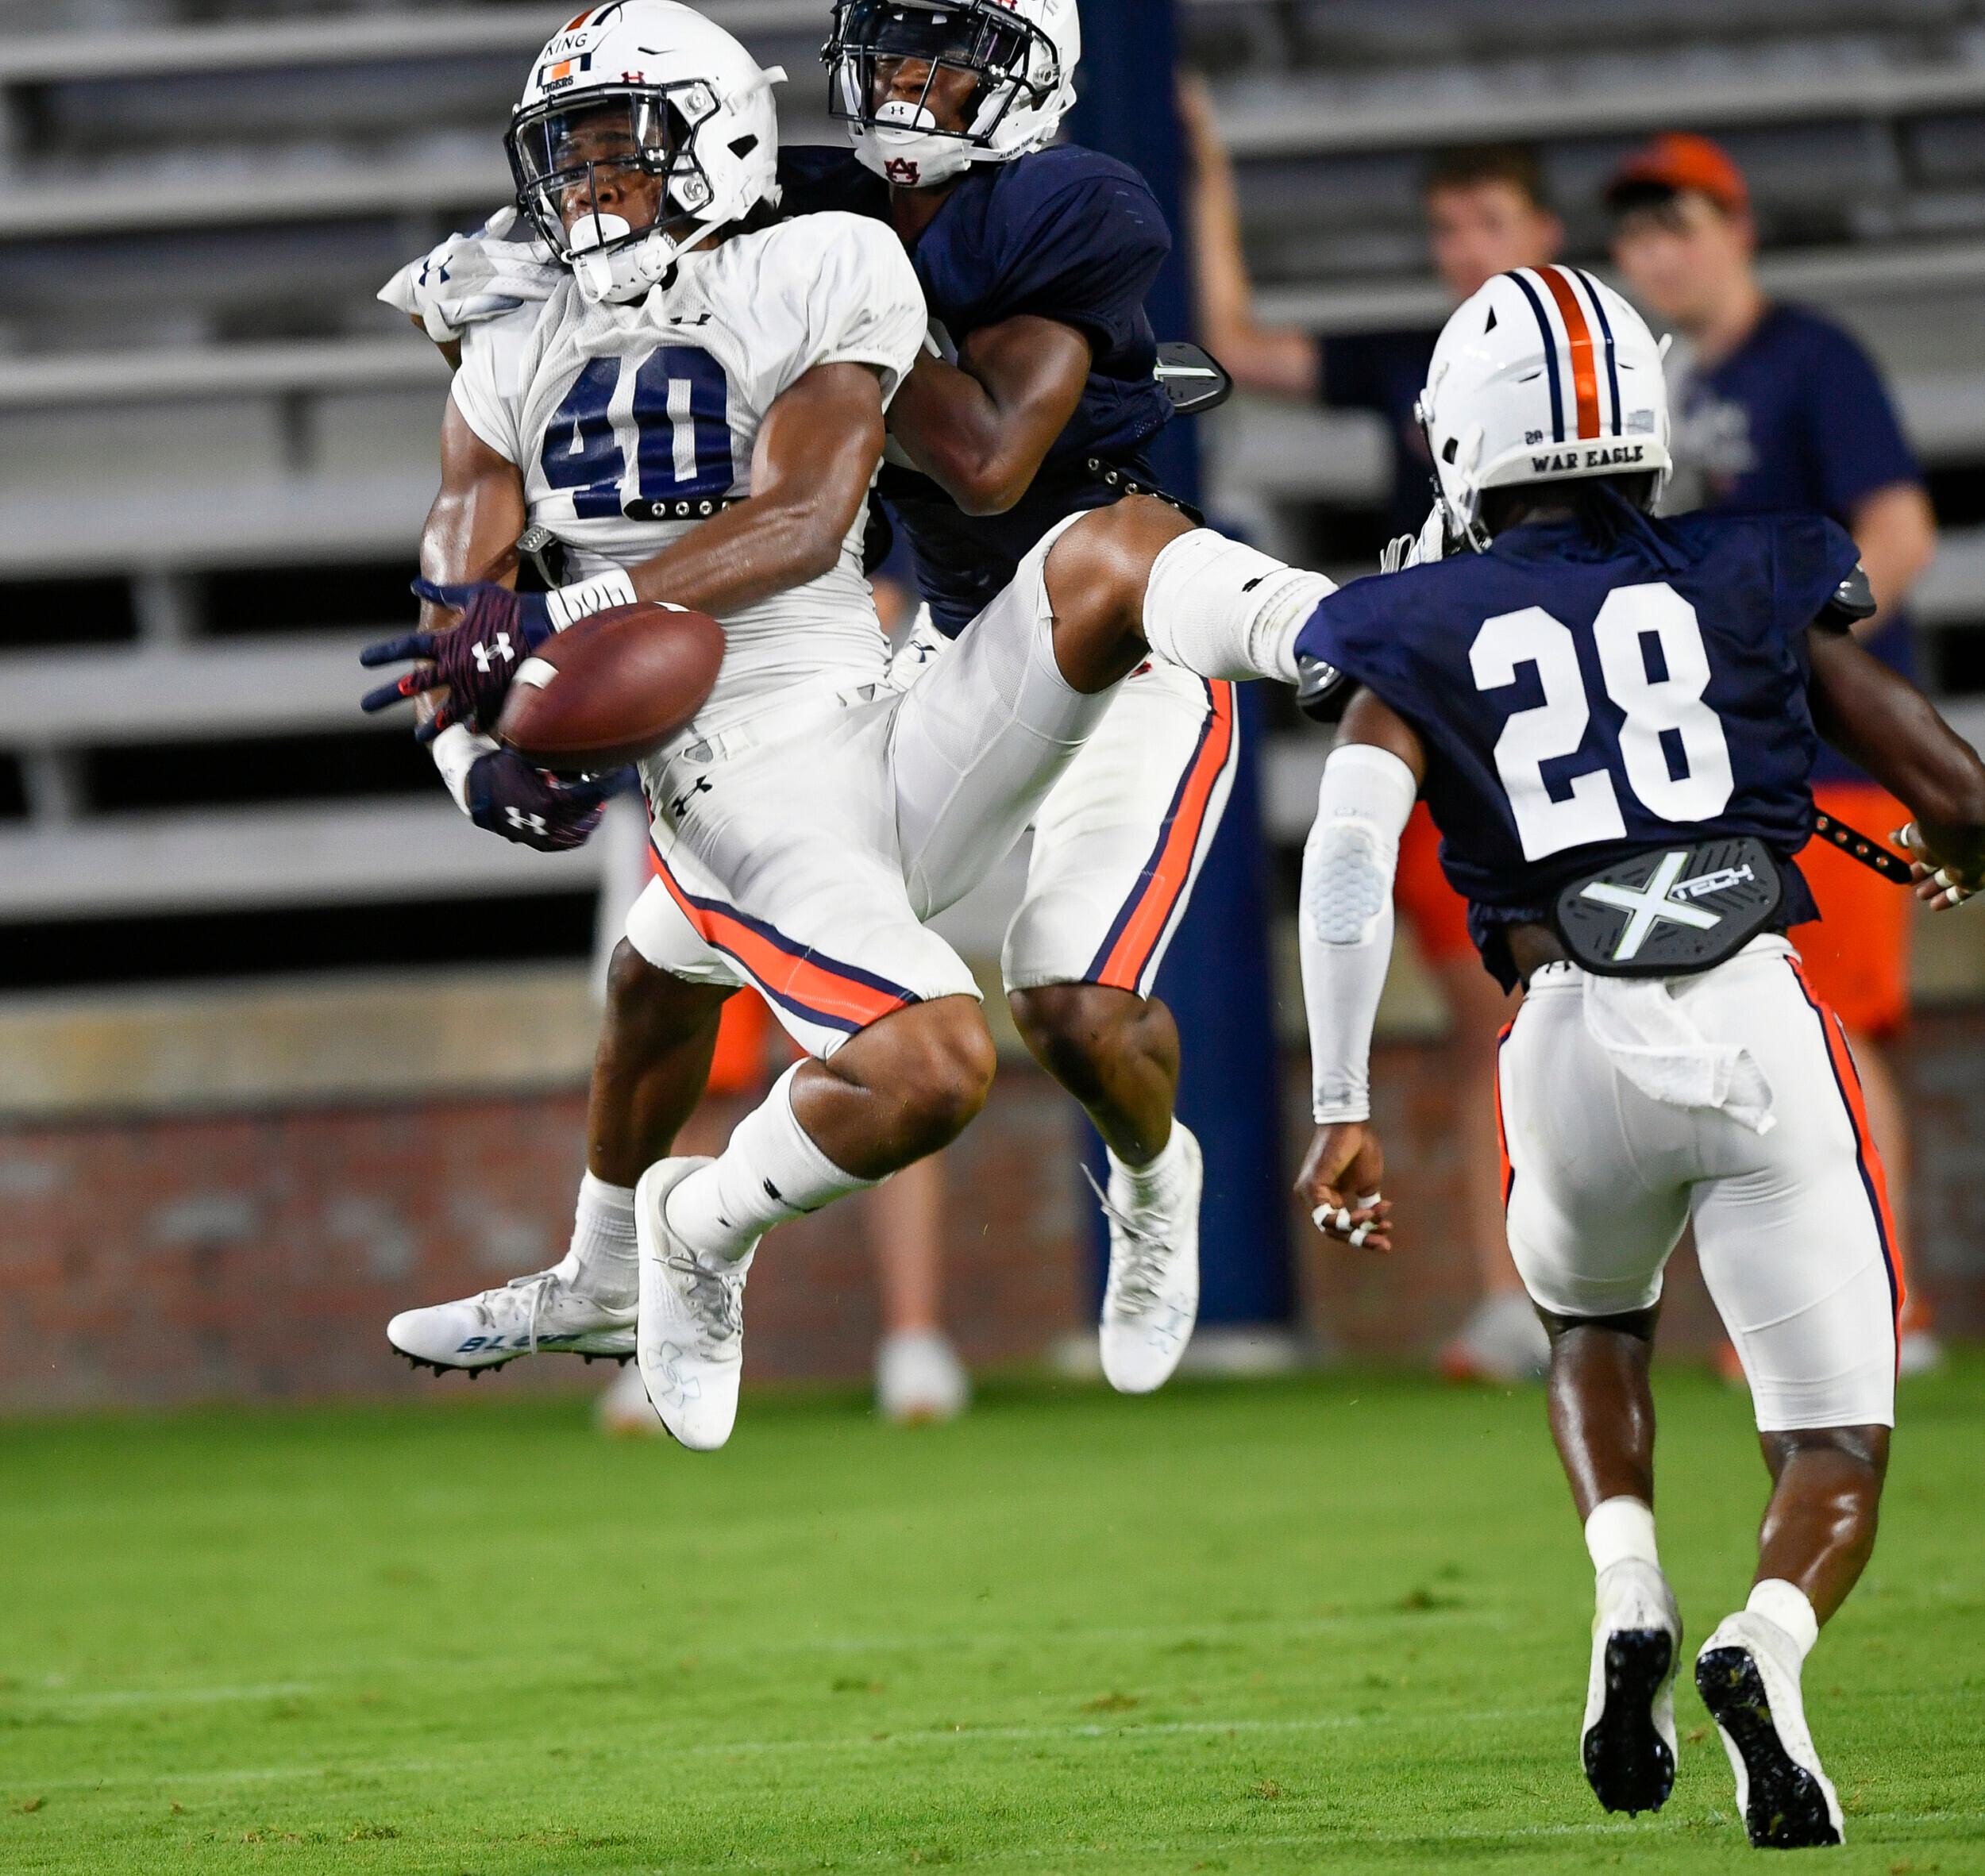 2 Landen King (40) is unable to hang-on defended by Trey Elston  (22). Auburn football scrimmage 1 on Saturday,  Aug. 14, 2021 in Auburn, Ala. Todd Van Emst/AU Athletics